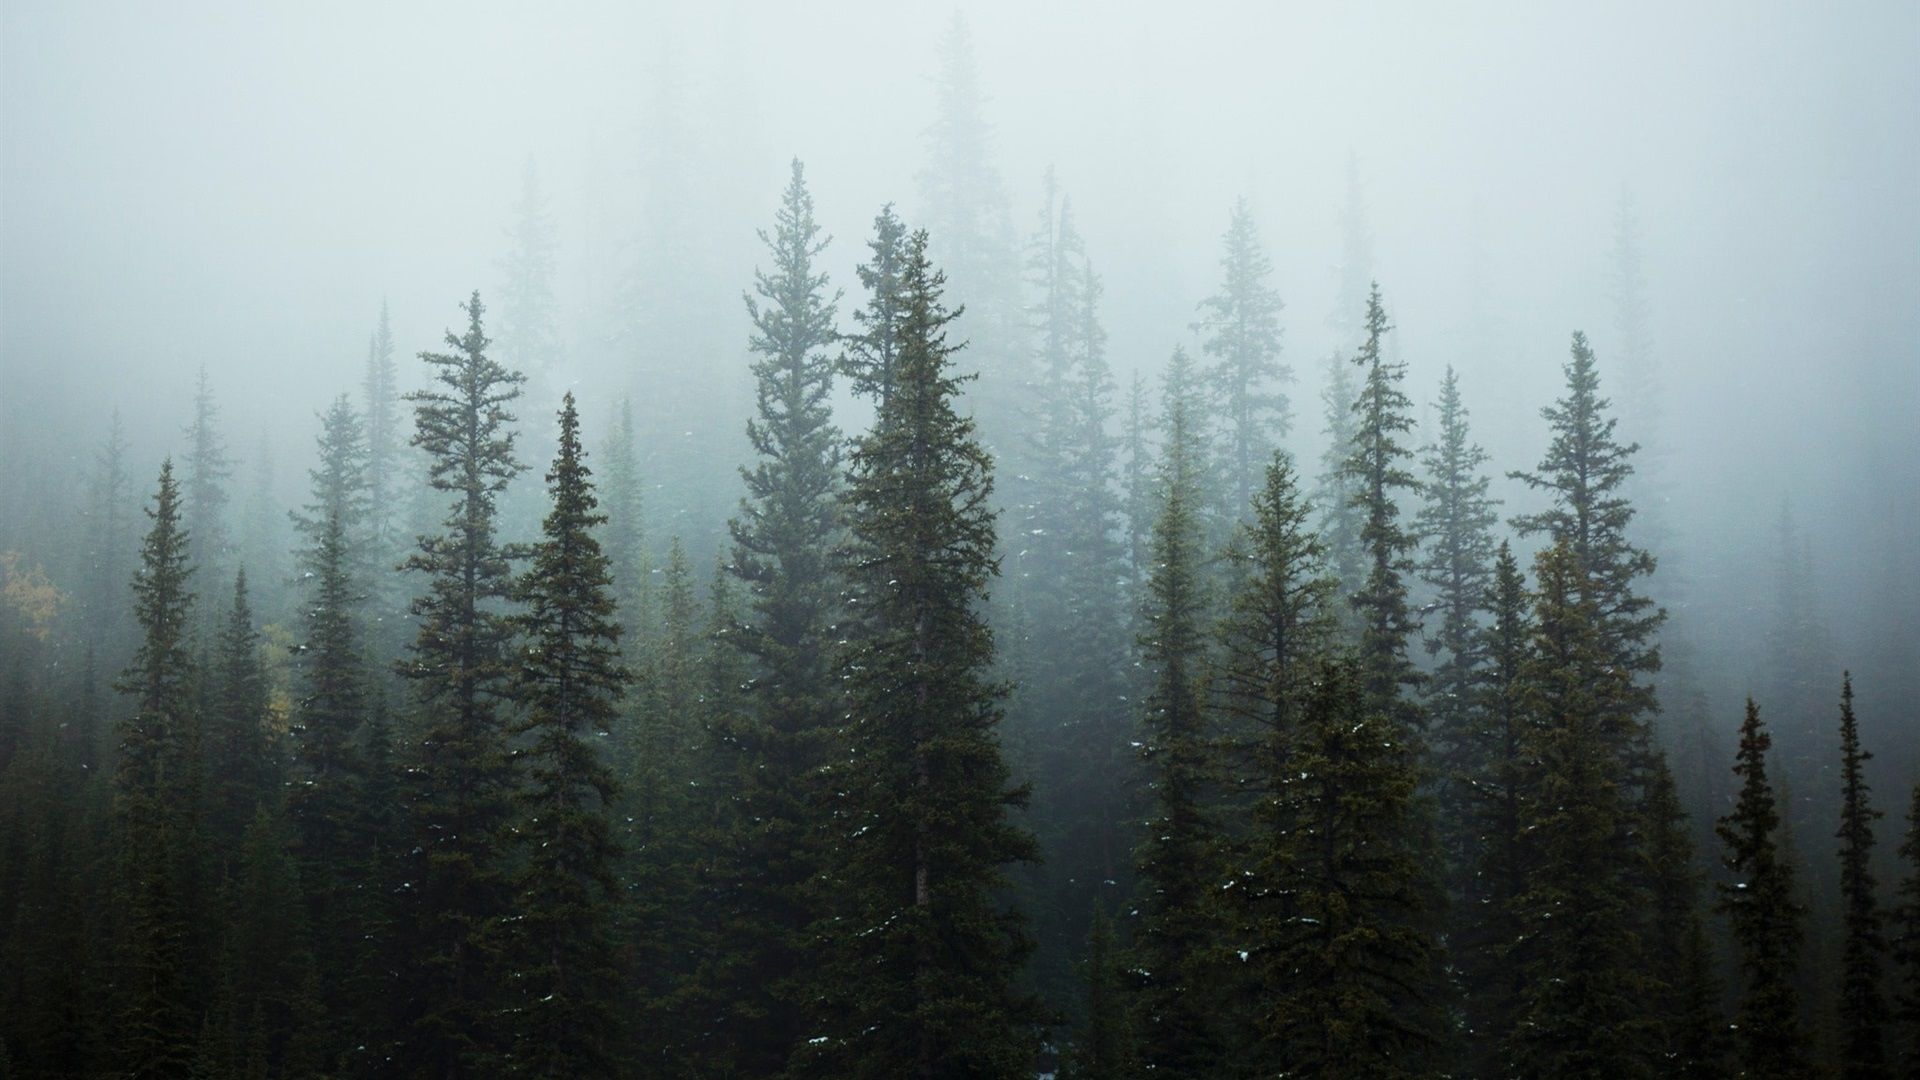 A group of trees in the fog - Fog